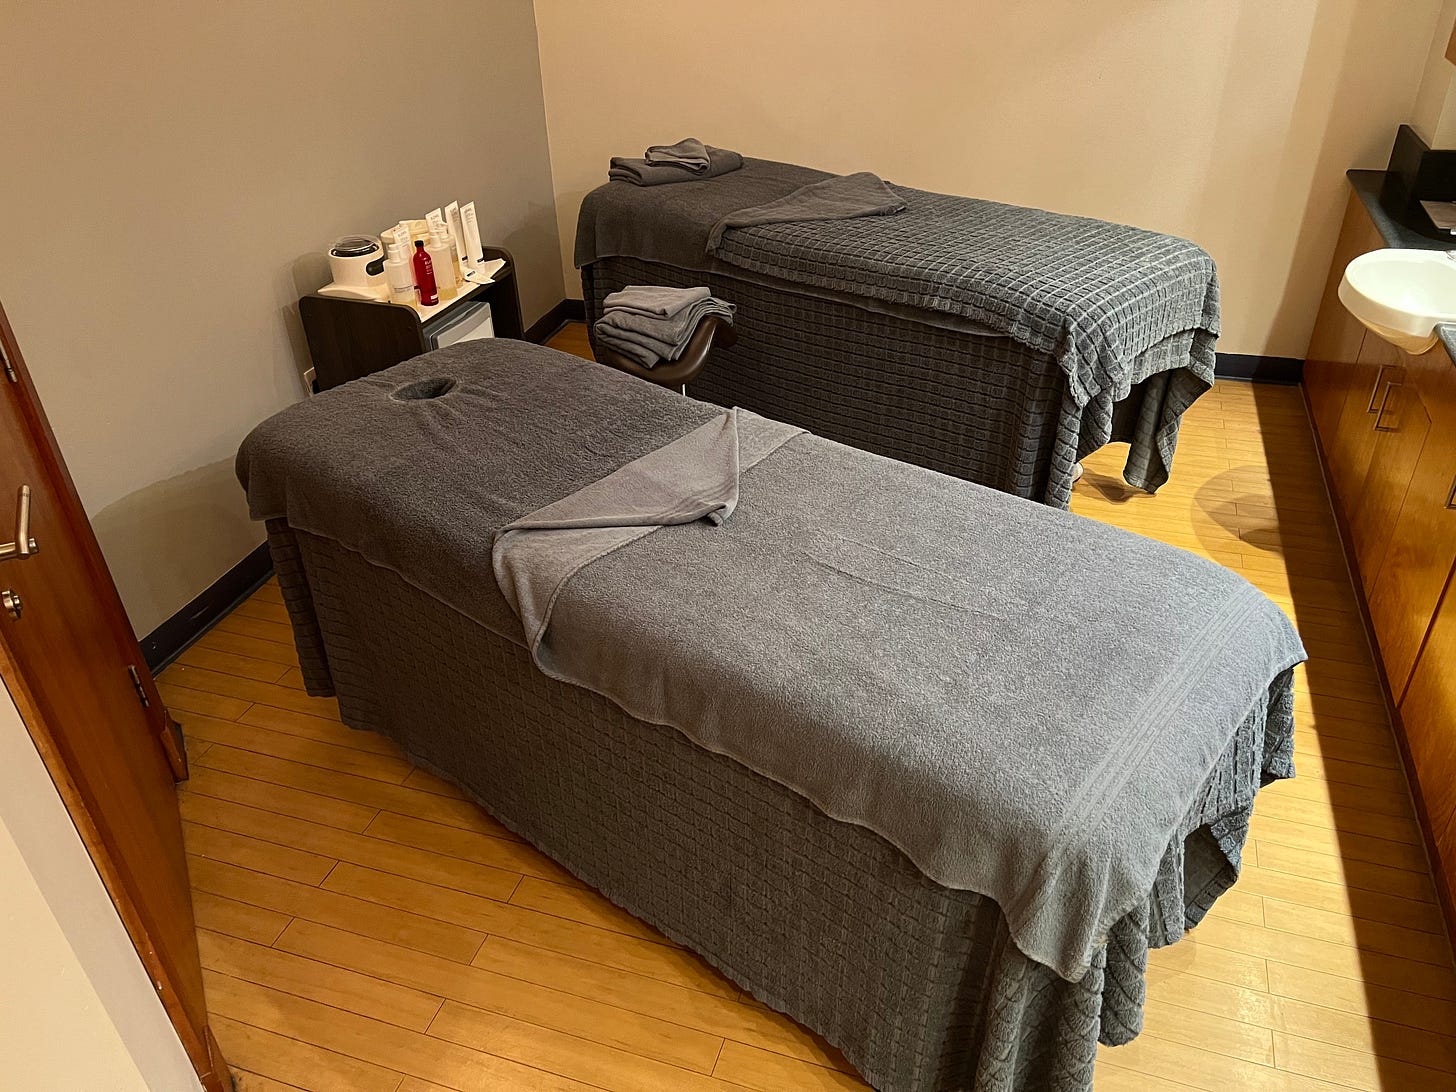 Two massage tables appear in a tidy but small room.